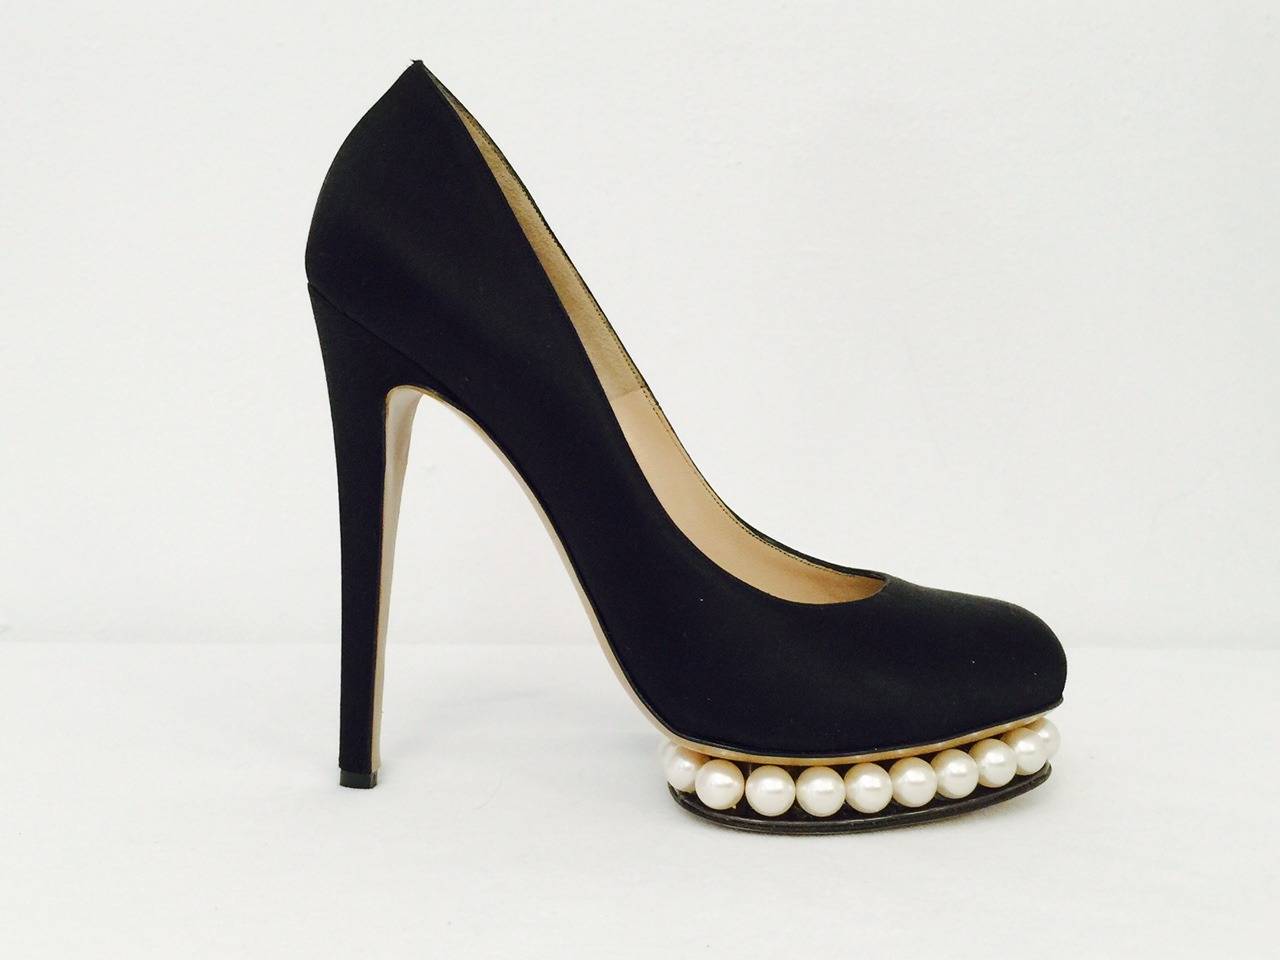 Walk on strings of pearls with every step in these New NIcholas Kirkwood Casati Pearl Platform Satin Pumps!   A sophisticated, memorable statement is guaranteed when wearing these awe inspiring shoes. Hand-crafted in Italy with elegant black satin